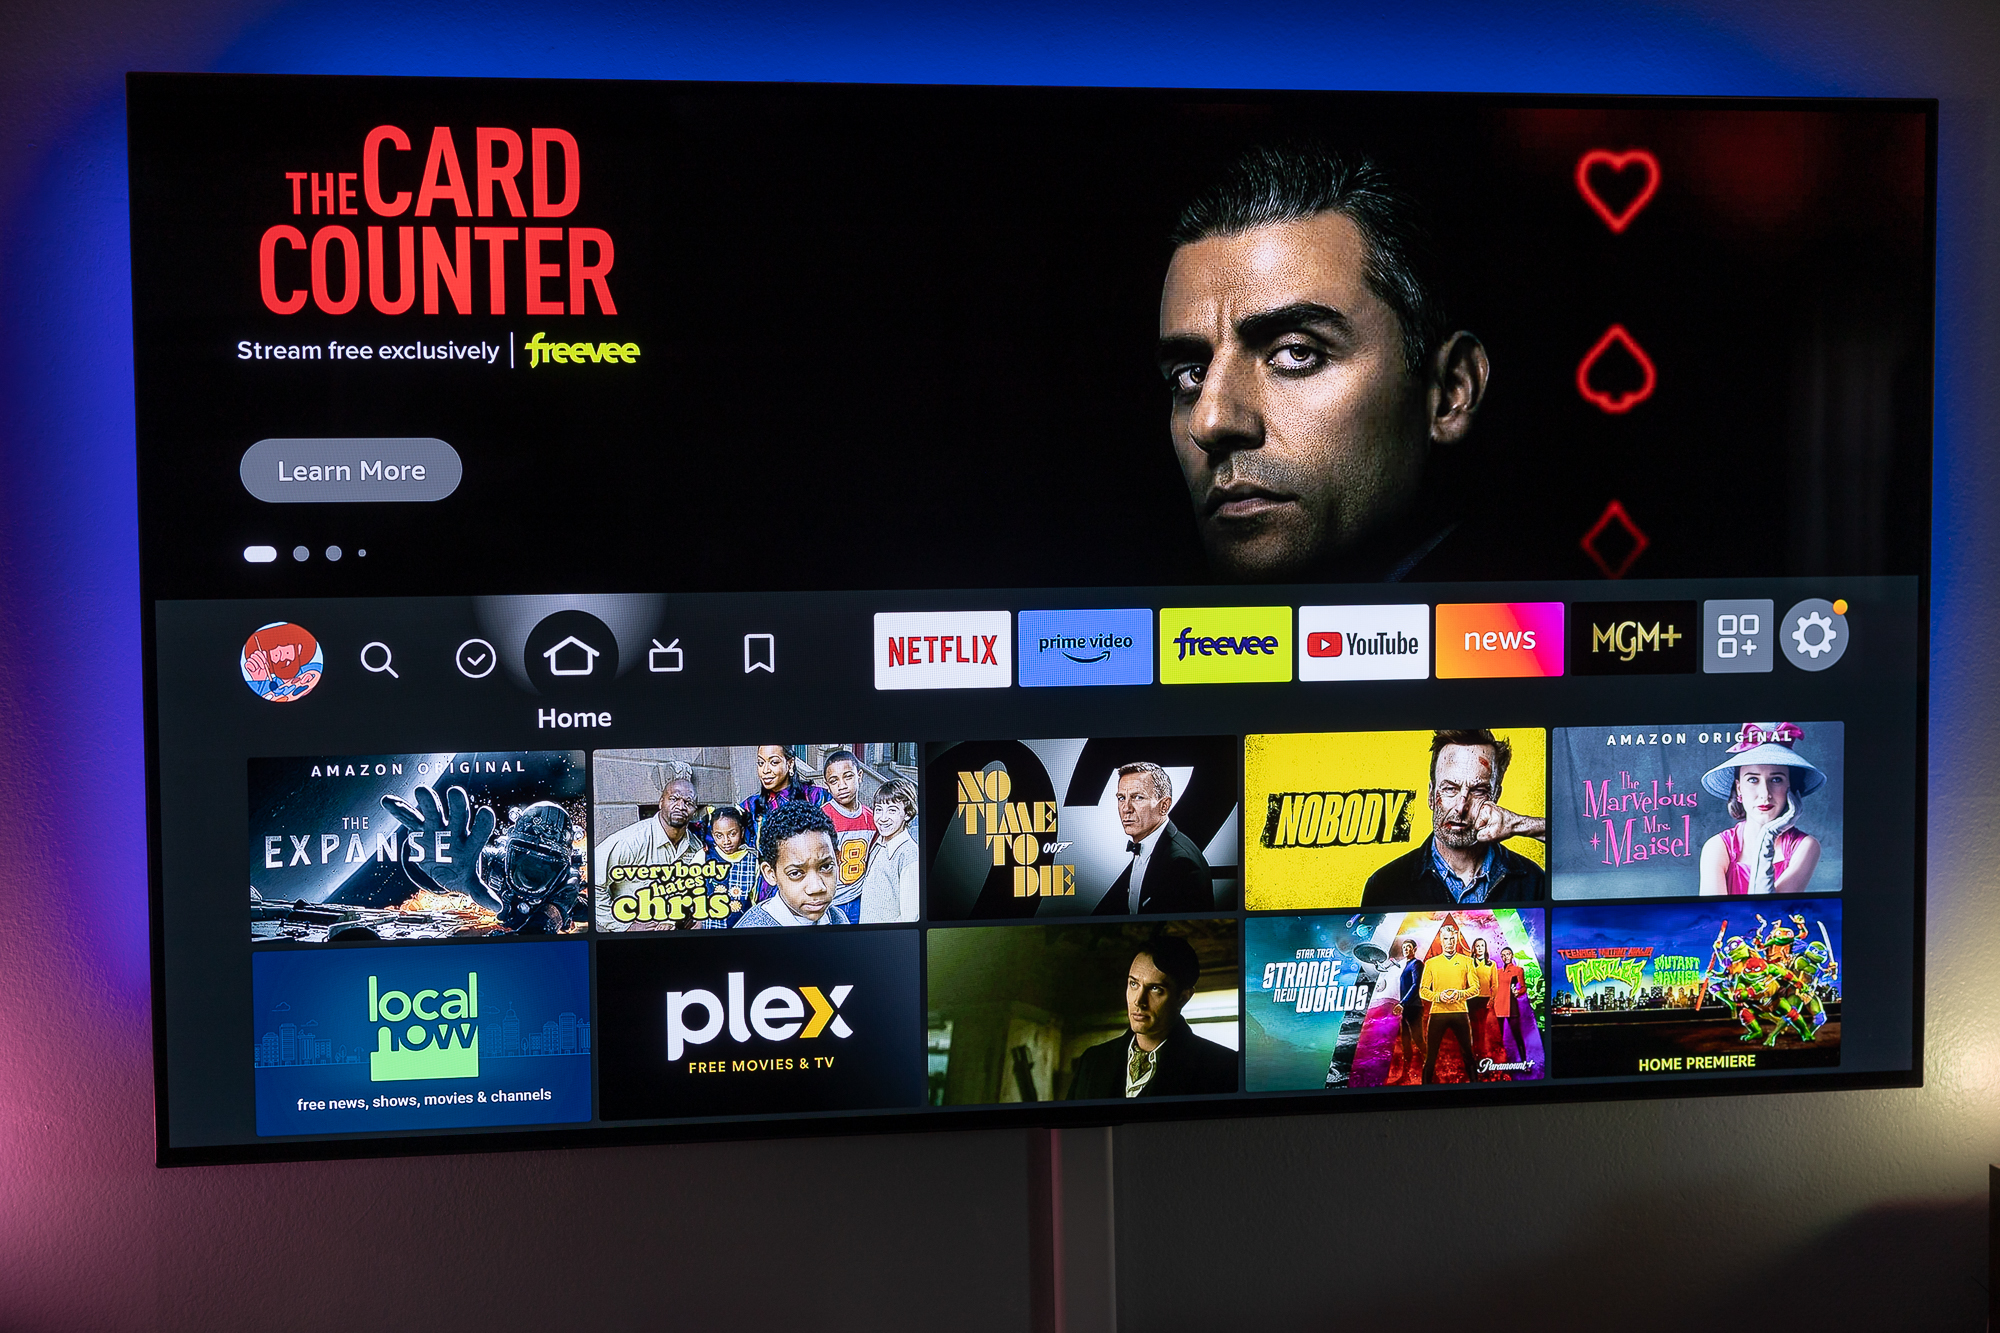 Fire TV 4K Max review: second-generation success